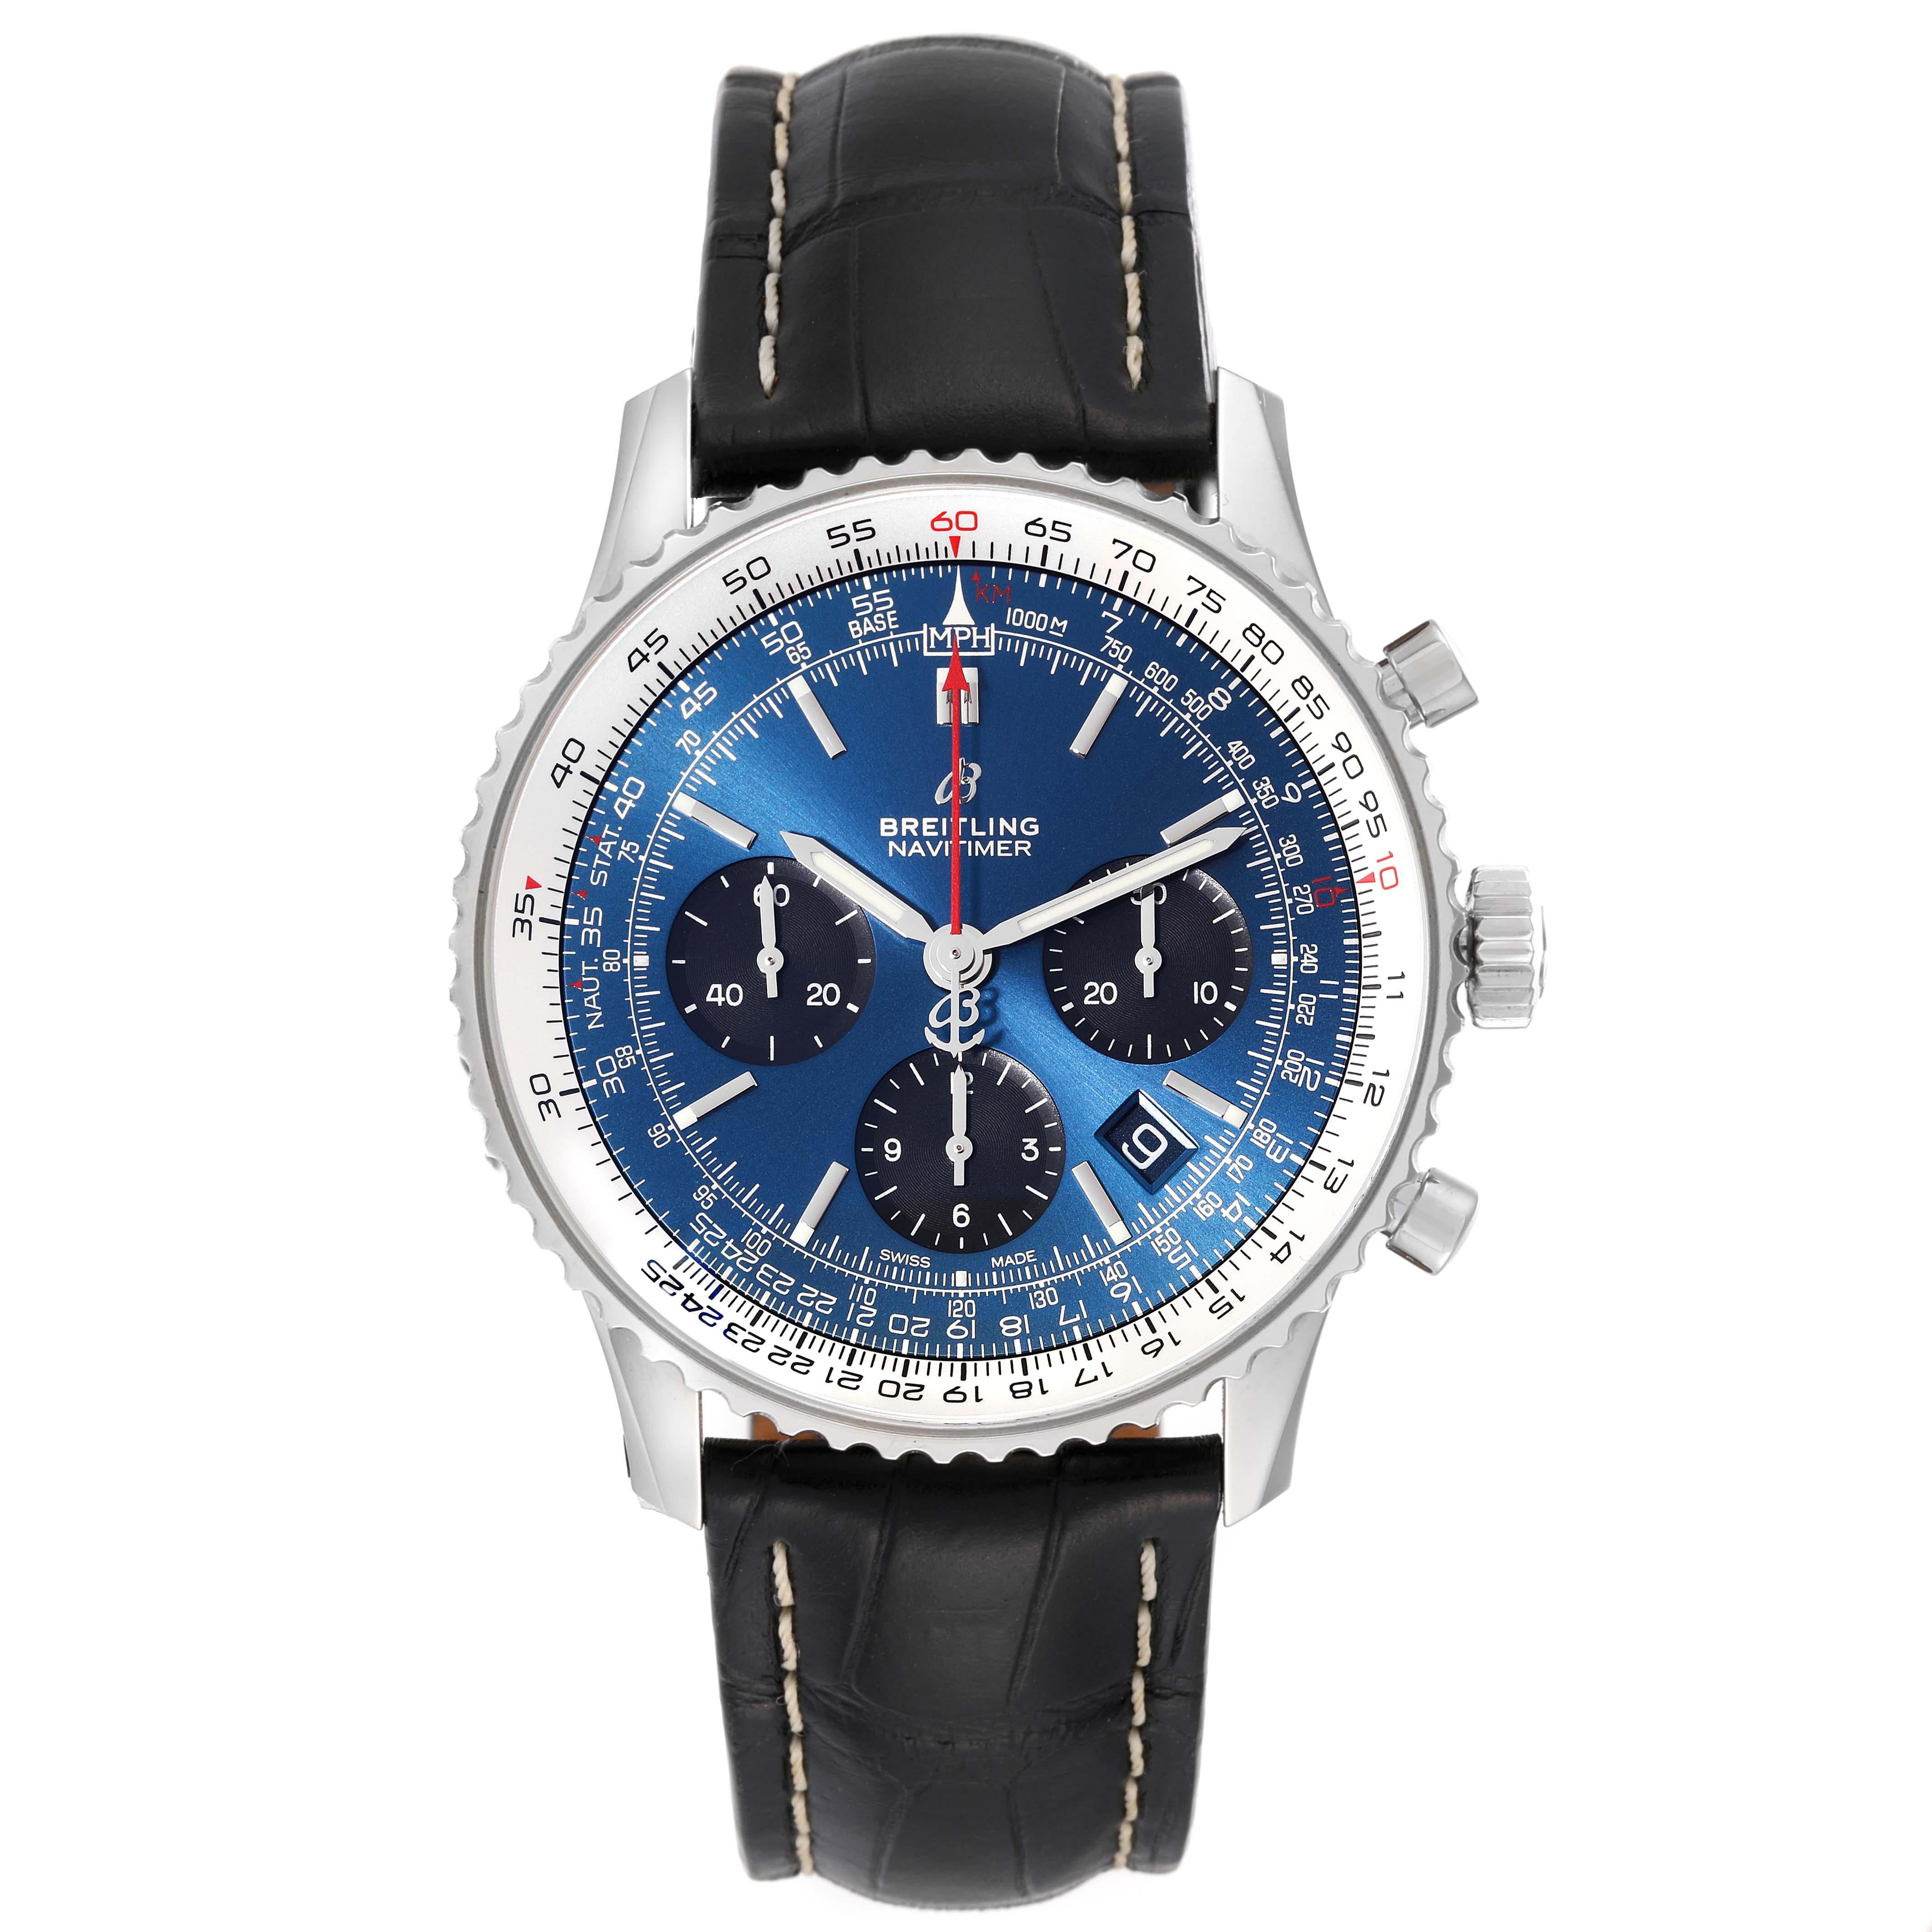 Breitling Navitimer 01 Blue Dial Steel Mens Watch AB0121 Unworn. Self-winding automatic officially certified chronometer movement. Chronograph function. Stainless steel case 43 mm in diameter. Case thickness 14.25 mm. Transparent exhibition sapphire